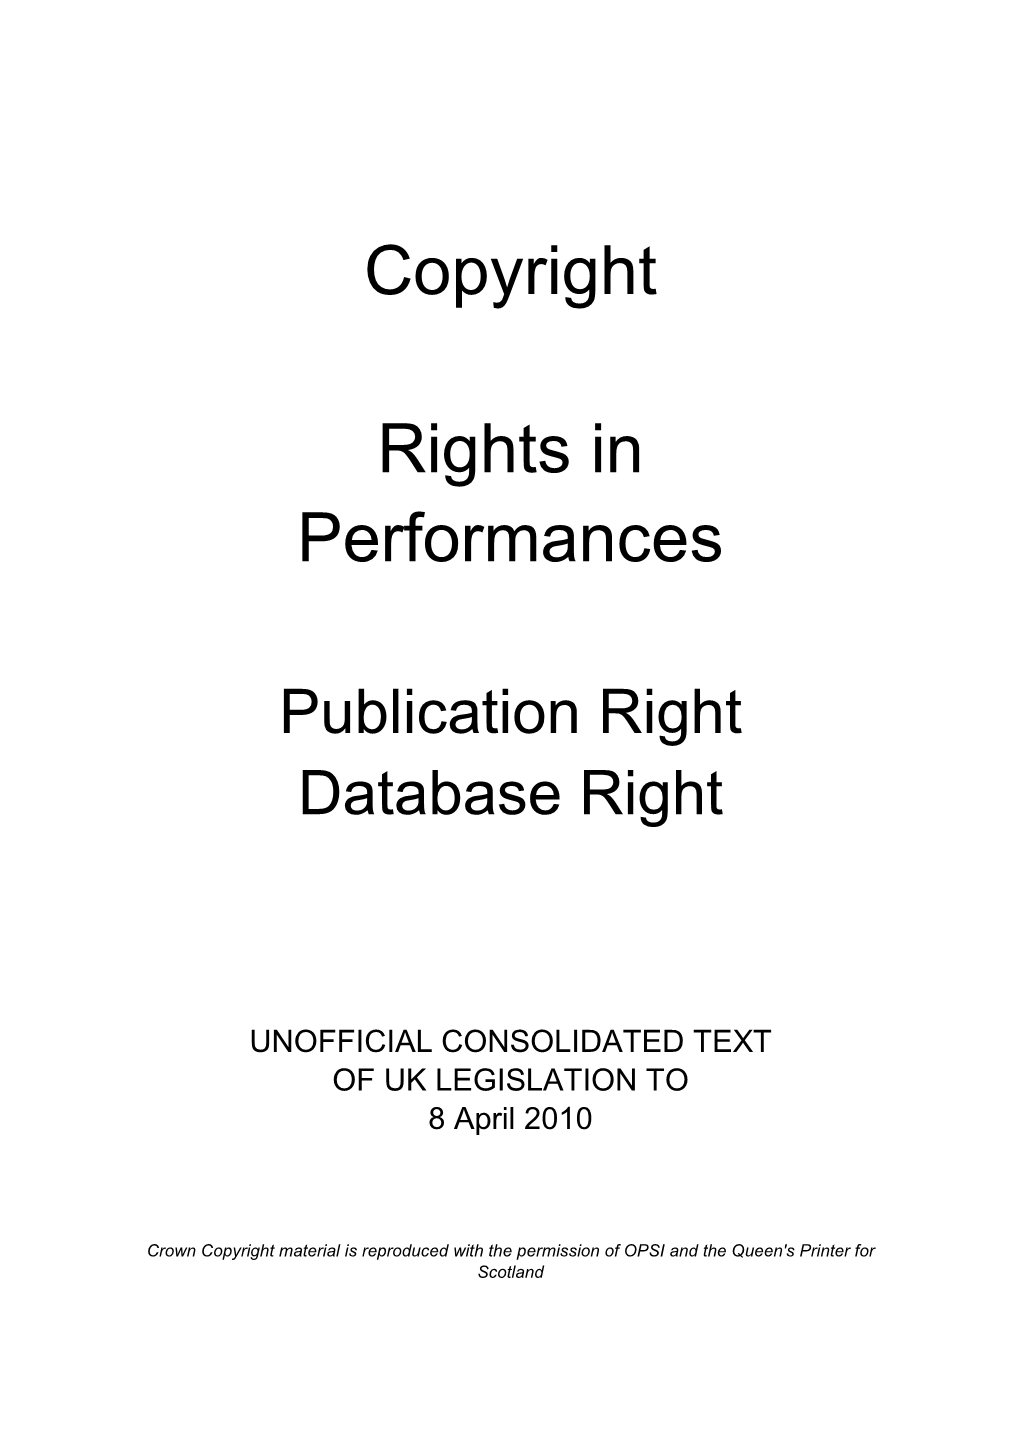 Copyright, Rights in Performances, Publication Right, Database Right